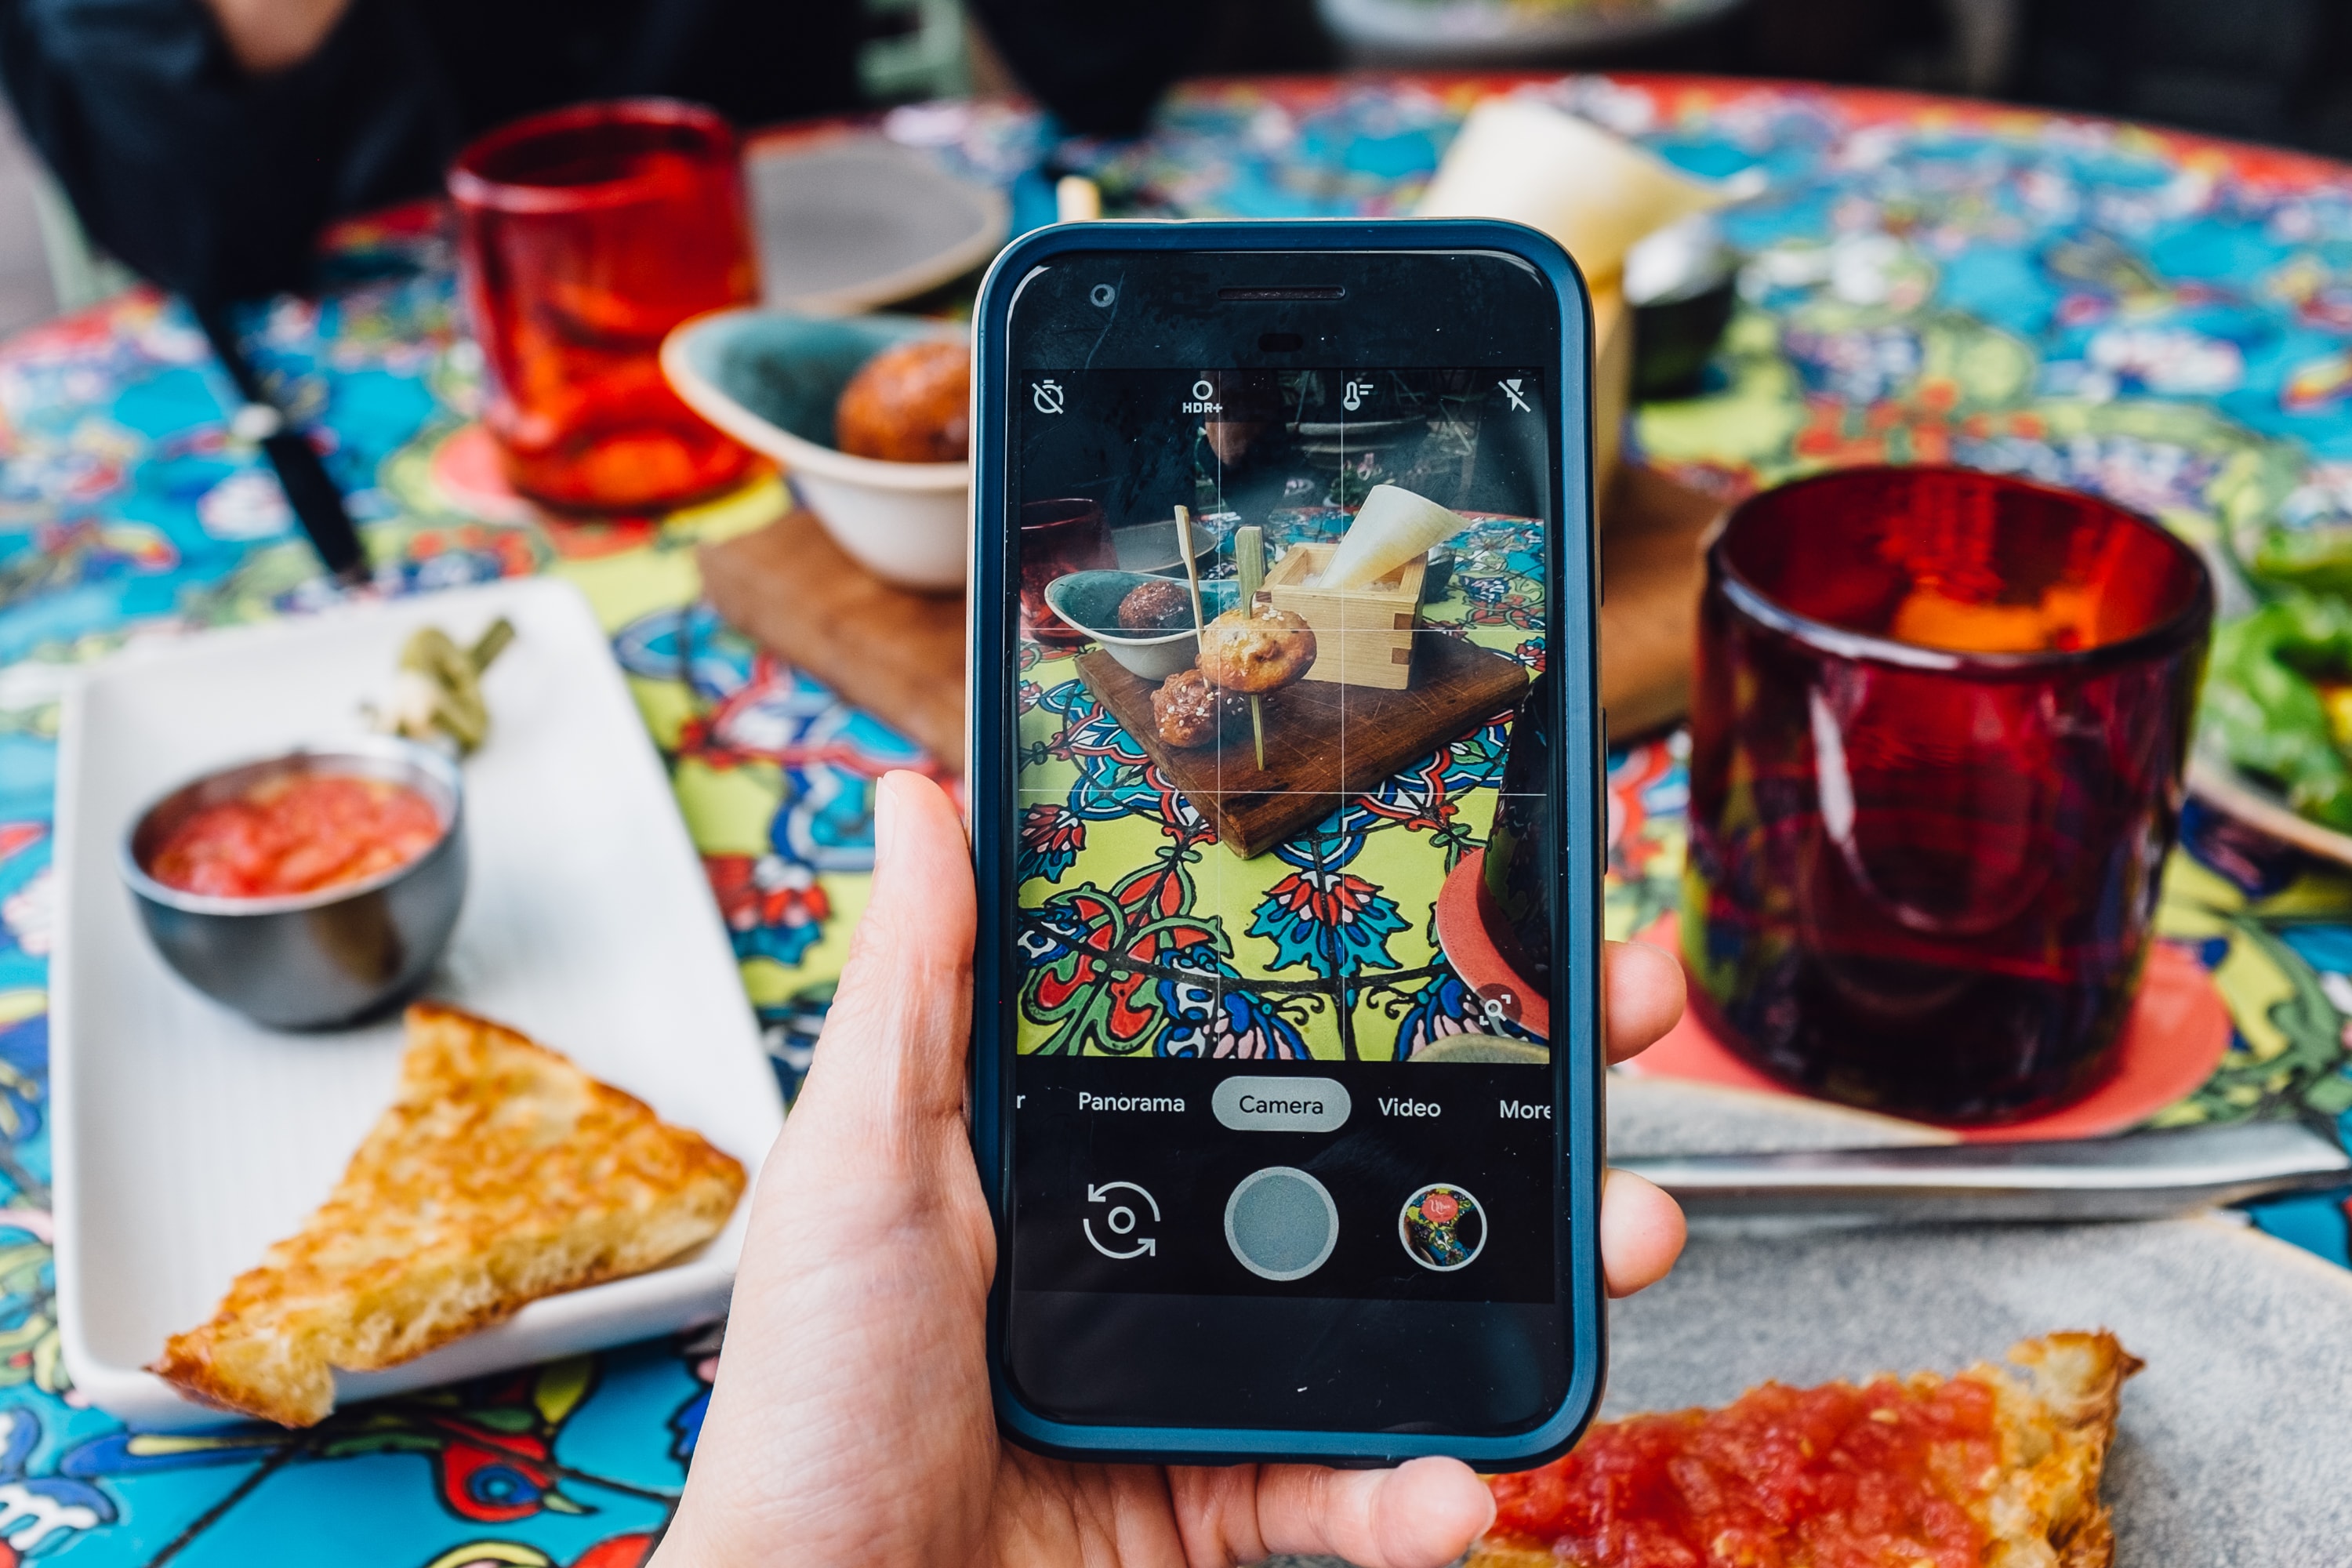 Taking photo of food with phone